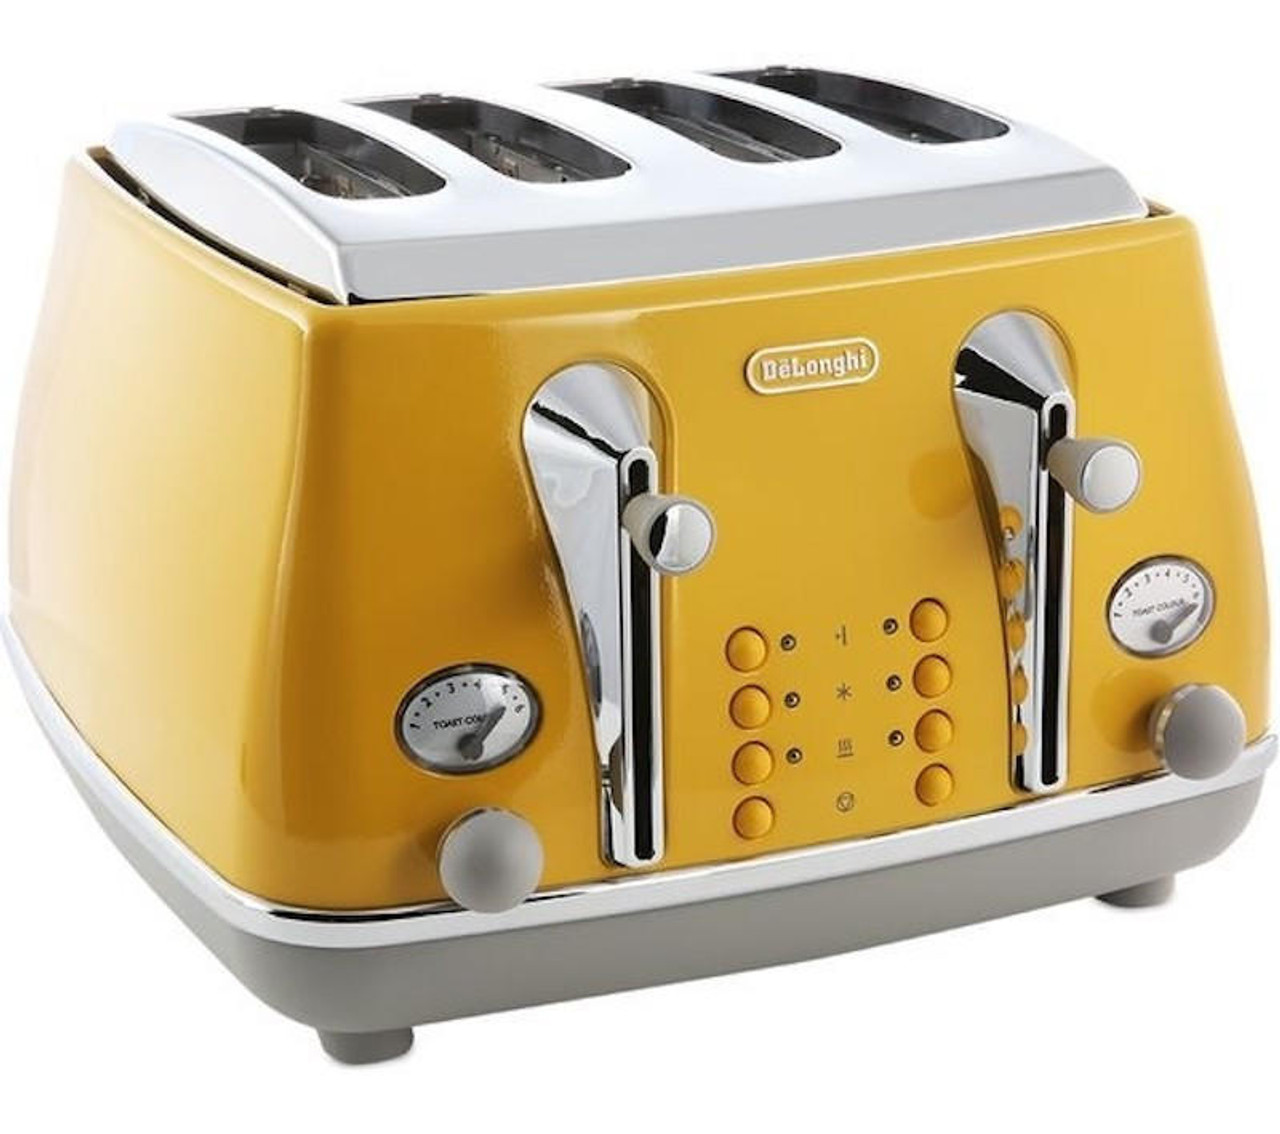 https://cdn11.bigcommerce.com/s-8ek7z3h3jn/images/stencil/1280x1280/products/5081/28768/delonghi-icona-capitals-4-slice-yellow-toaster-or-ctoc4003y__62070.1660065911.jpg?c=1